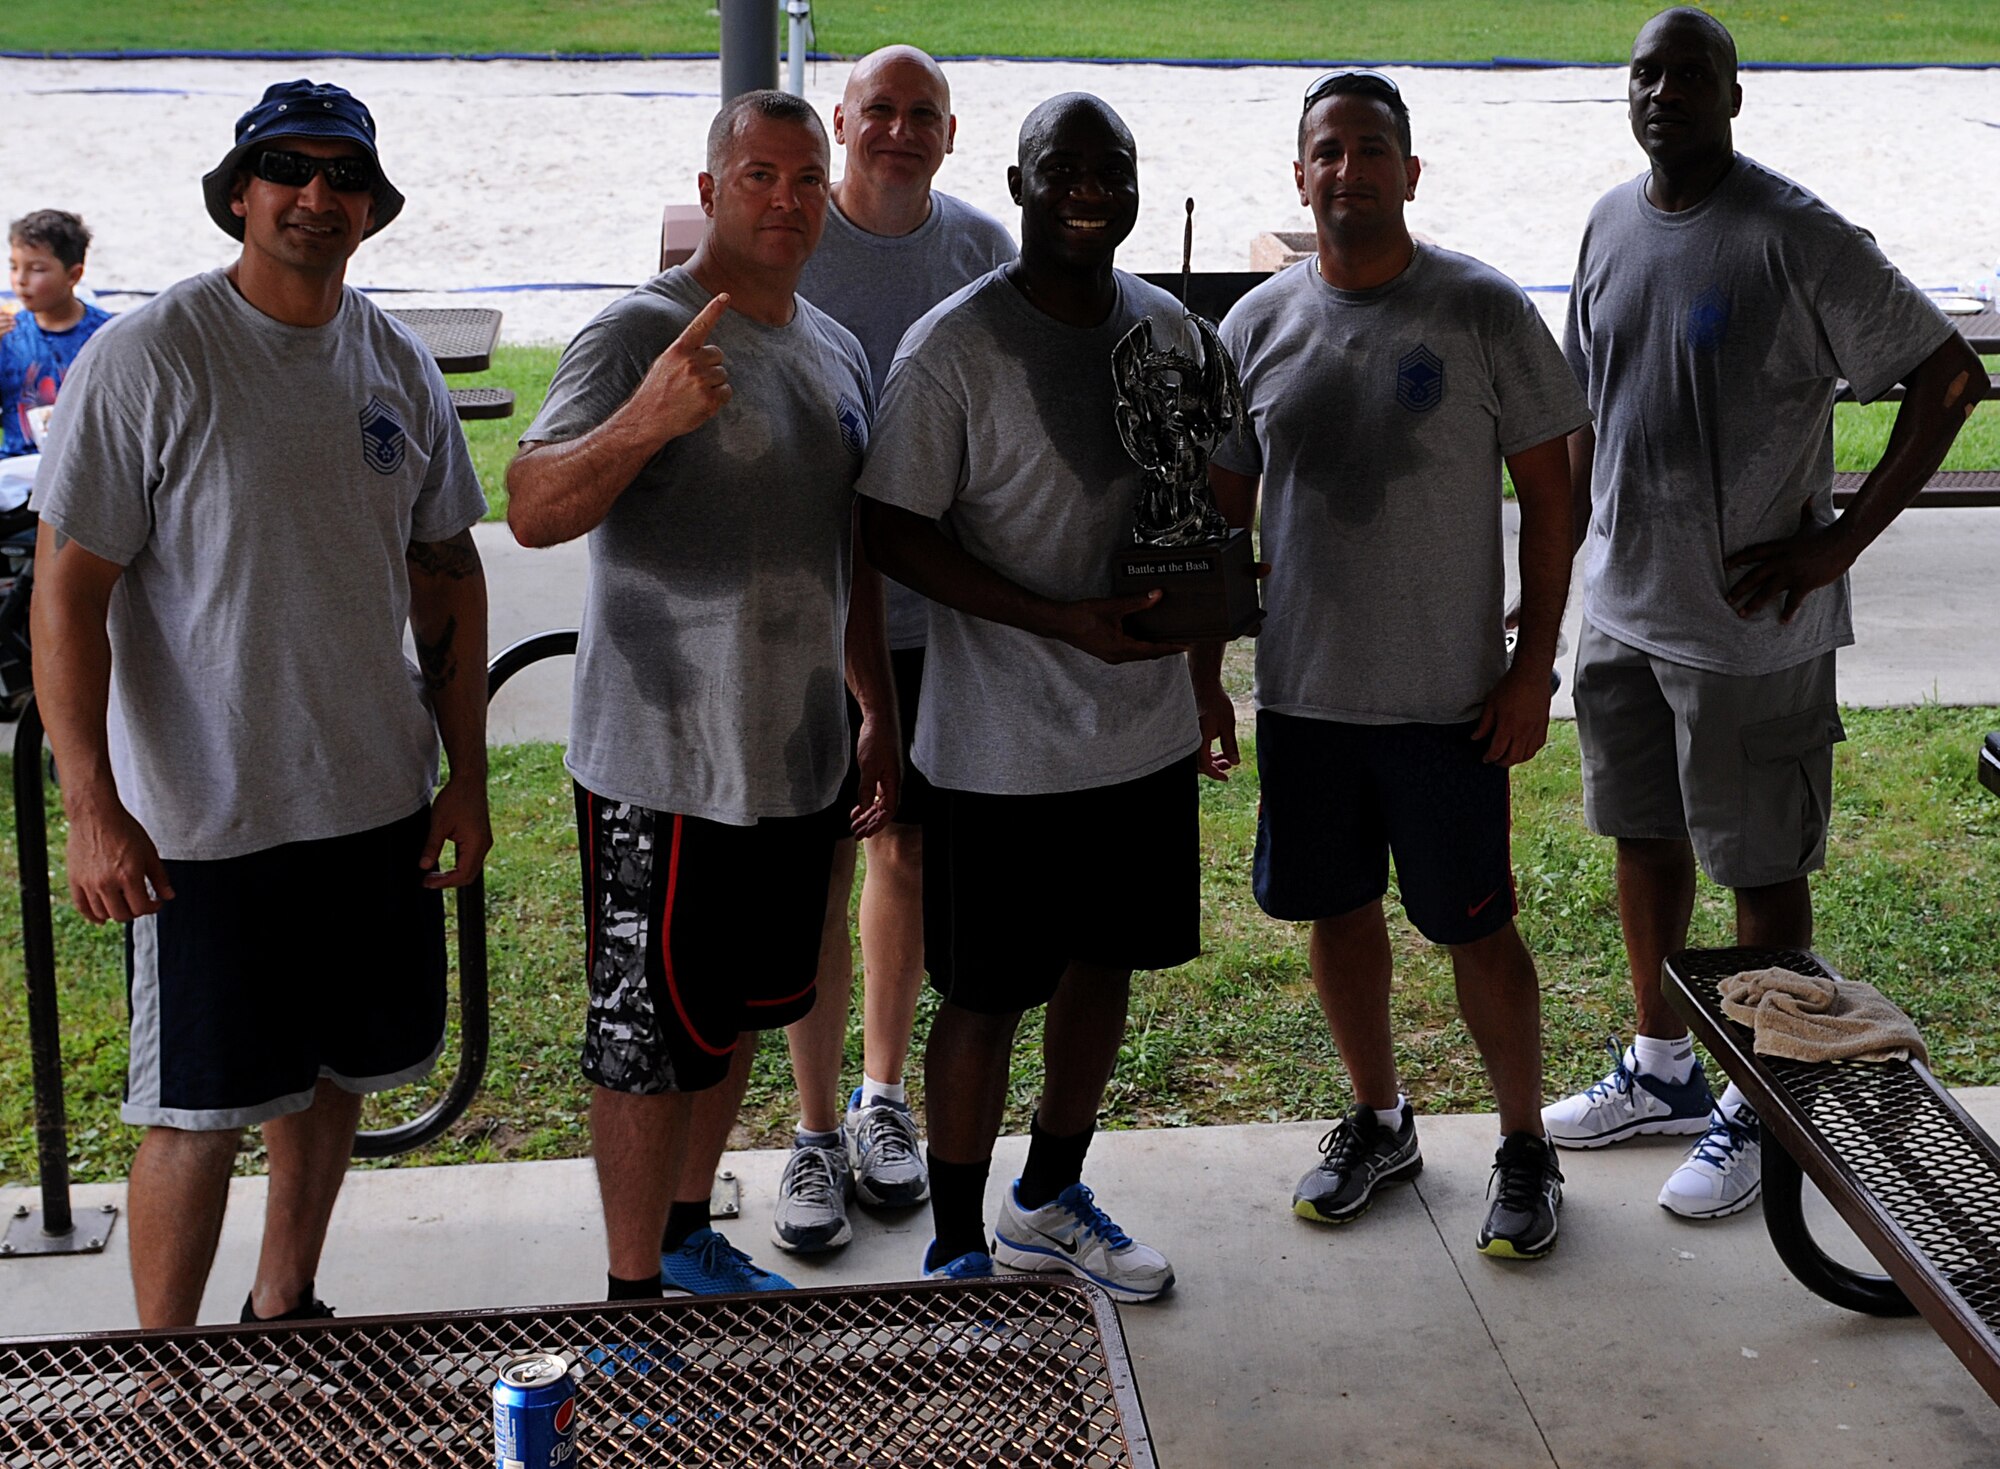 Keesler chief master sergeants pose for a photo during the 2017 Dorm Bash at the Biloxi Hall courtyard August 1, 2017, on Keesler Air Force Base, Miss. The Dorm Bash was sponsored by the Keesler Chiefs Group to provide an opportunity for Keesler dorm residents to spend time together in fellowship. The chief master sergeants took home the Battle of the Bash Dragon award. (U.S. Air Force photo by Airman 1st Class Suzanna Plotnikov)